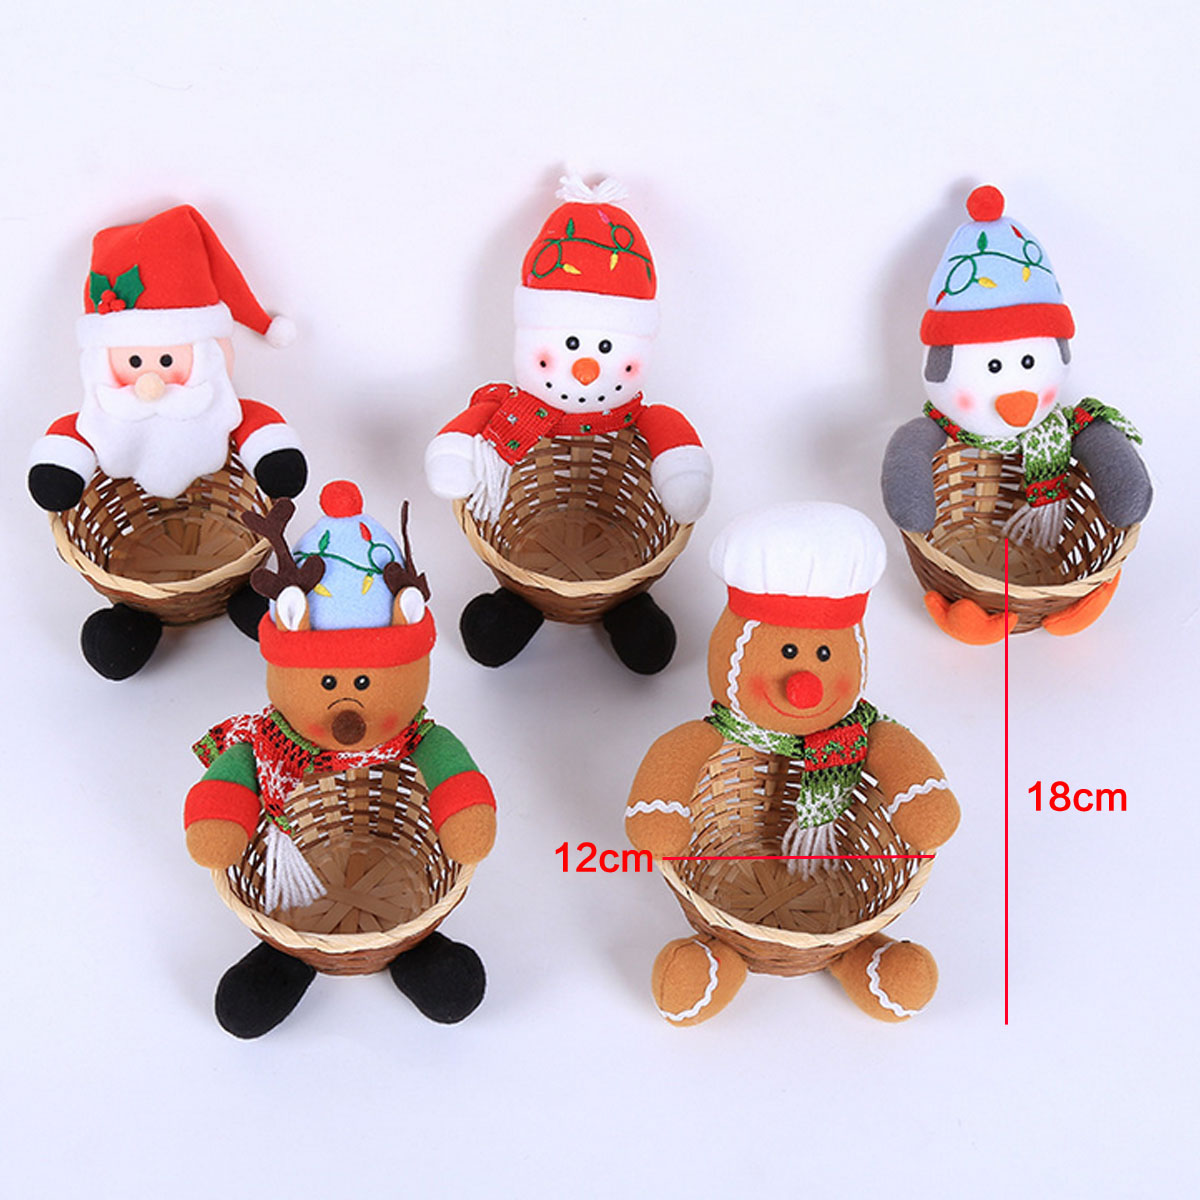 5-Types-Christmas-Candy-Storage-Basket-Santa-Claus-Home-Decorations-Ornaments-1477556-8